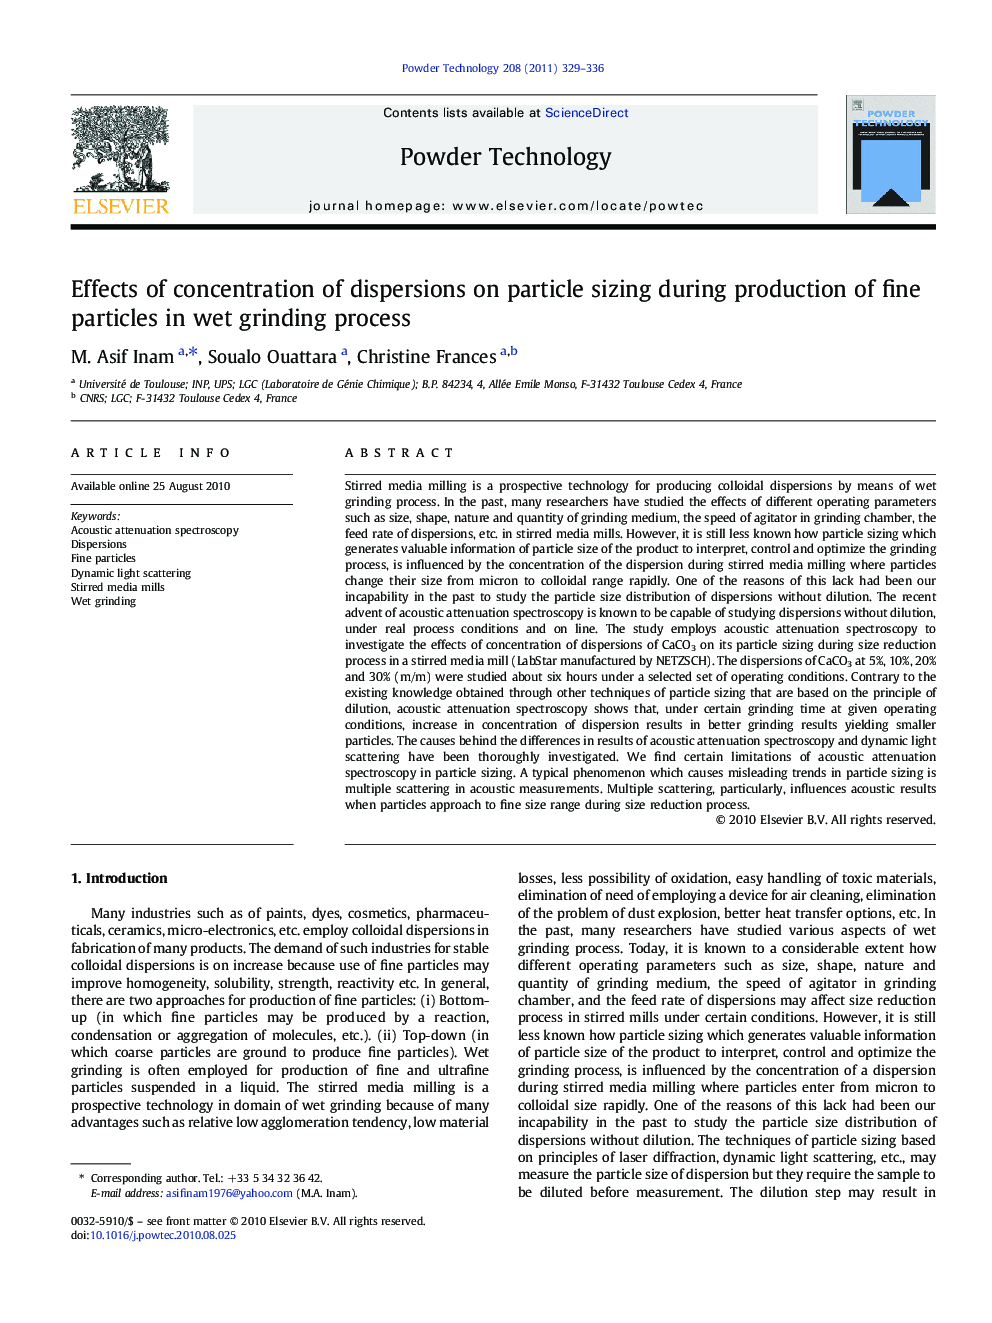 Effects of concentration of dispersions on particle sizing during production of fine particles in wet grinding process